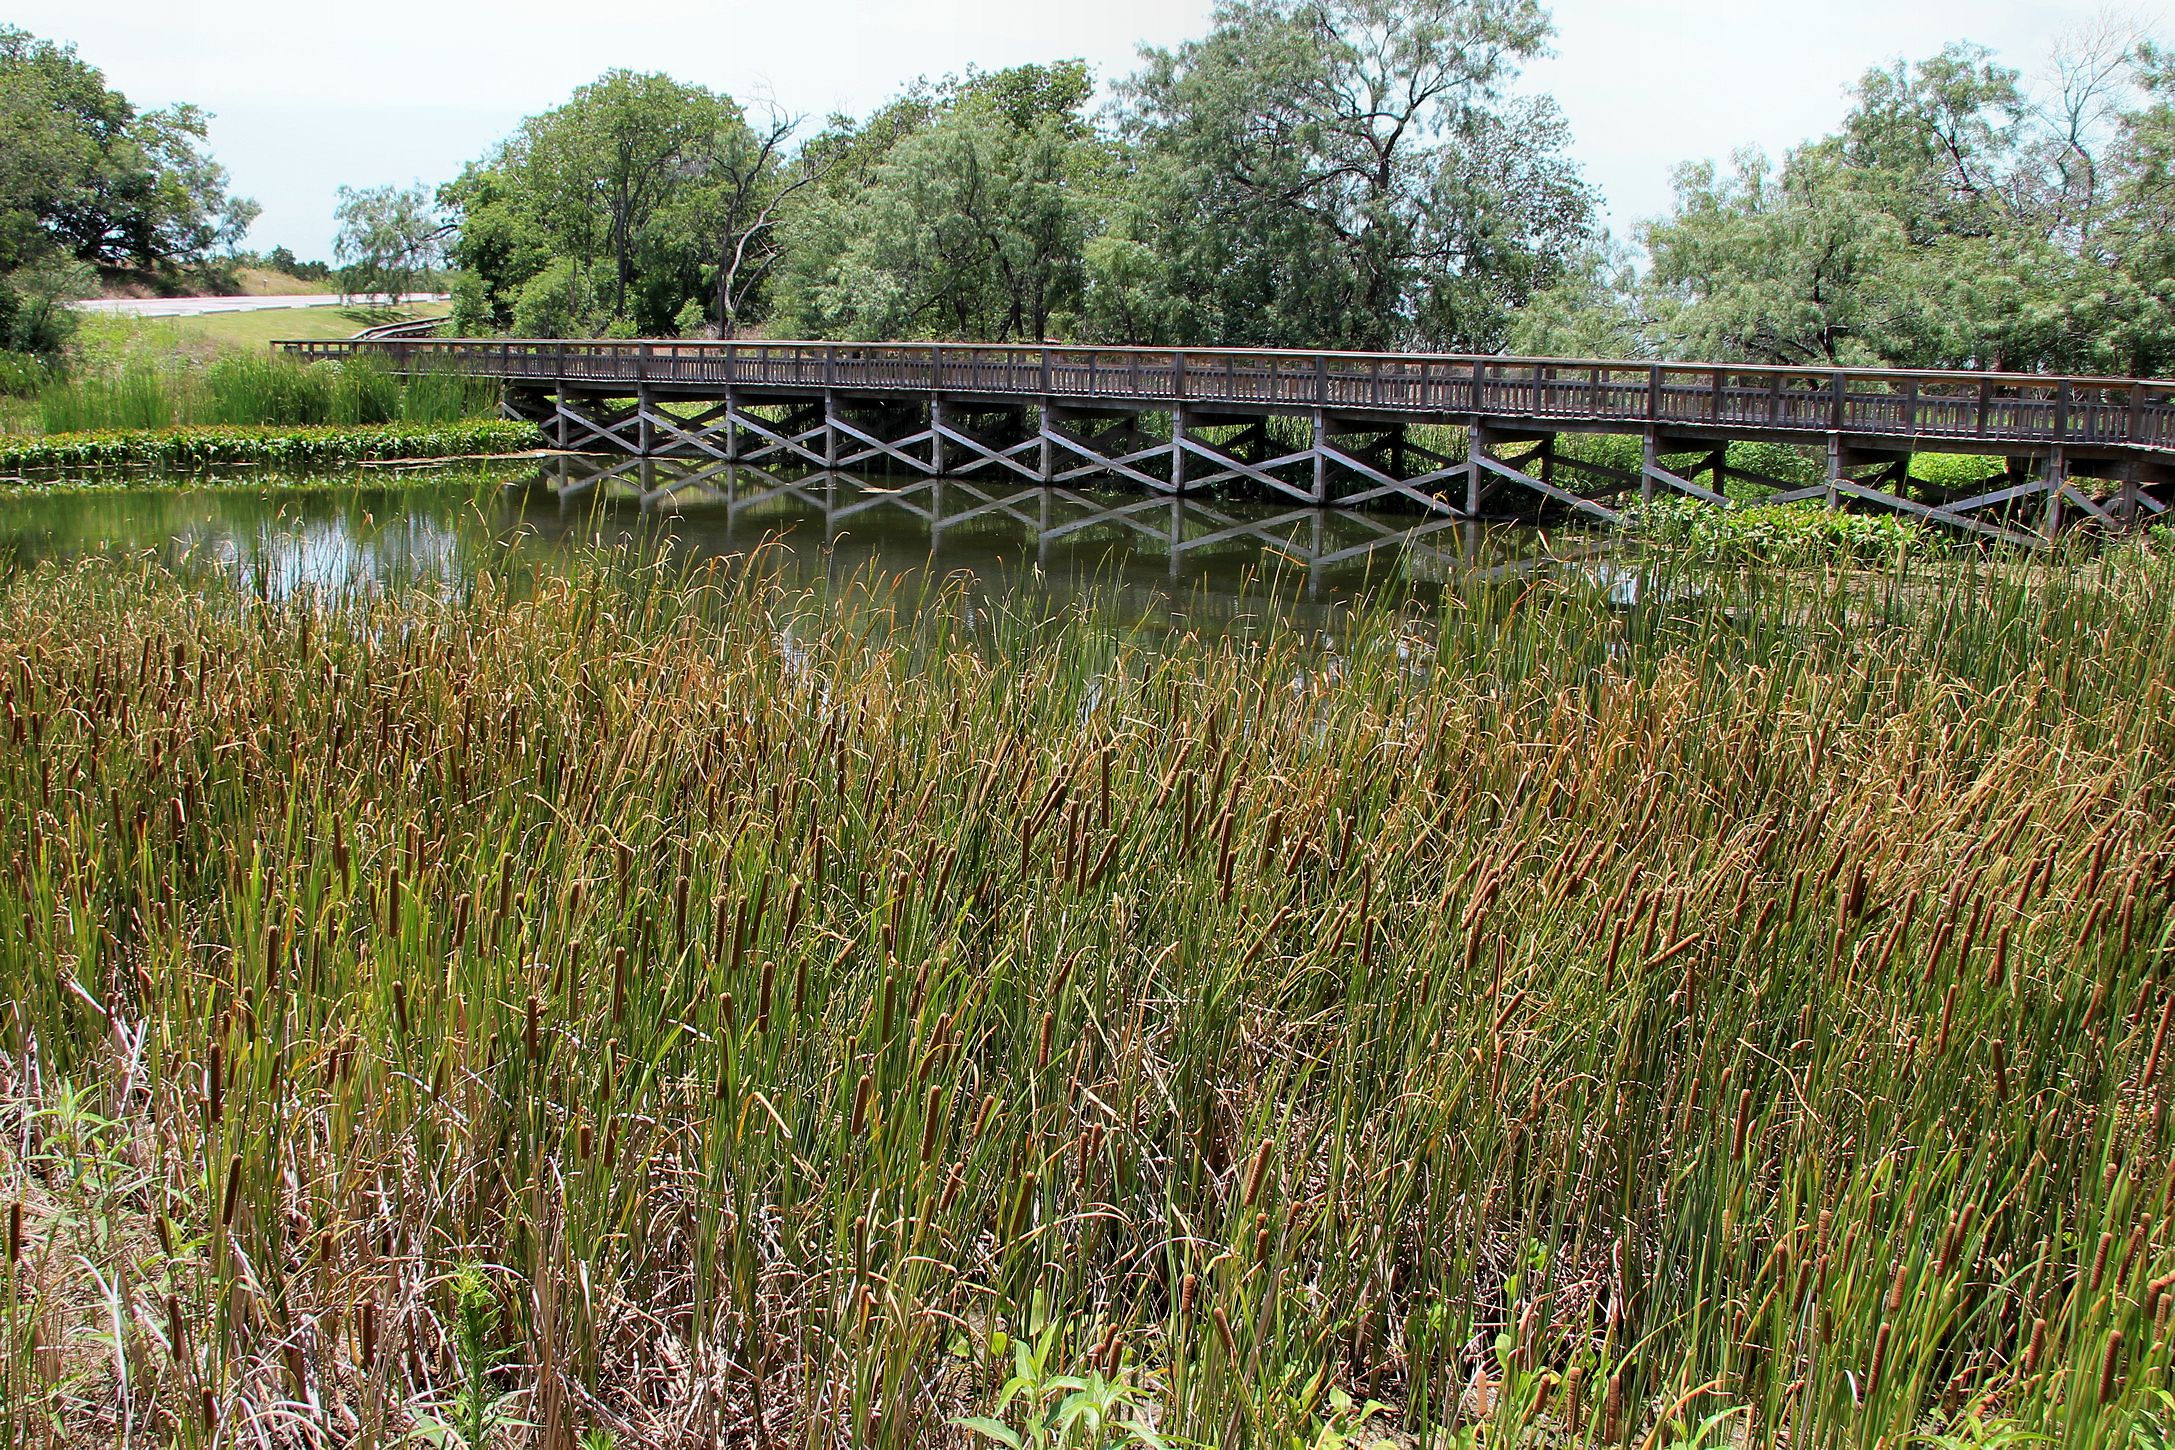 A wooden boardwalk extends over a pond surrounded by tall grasses and reeds, with trees in the background.